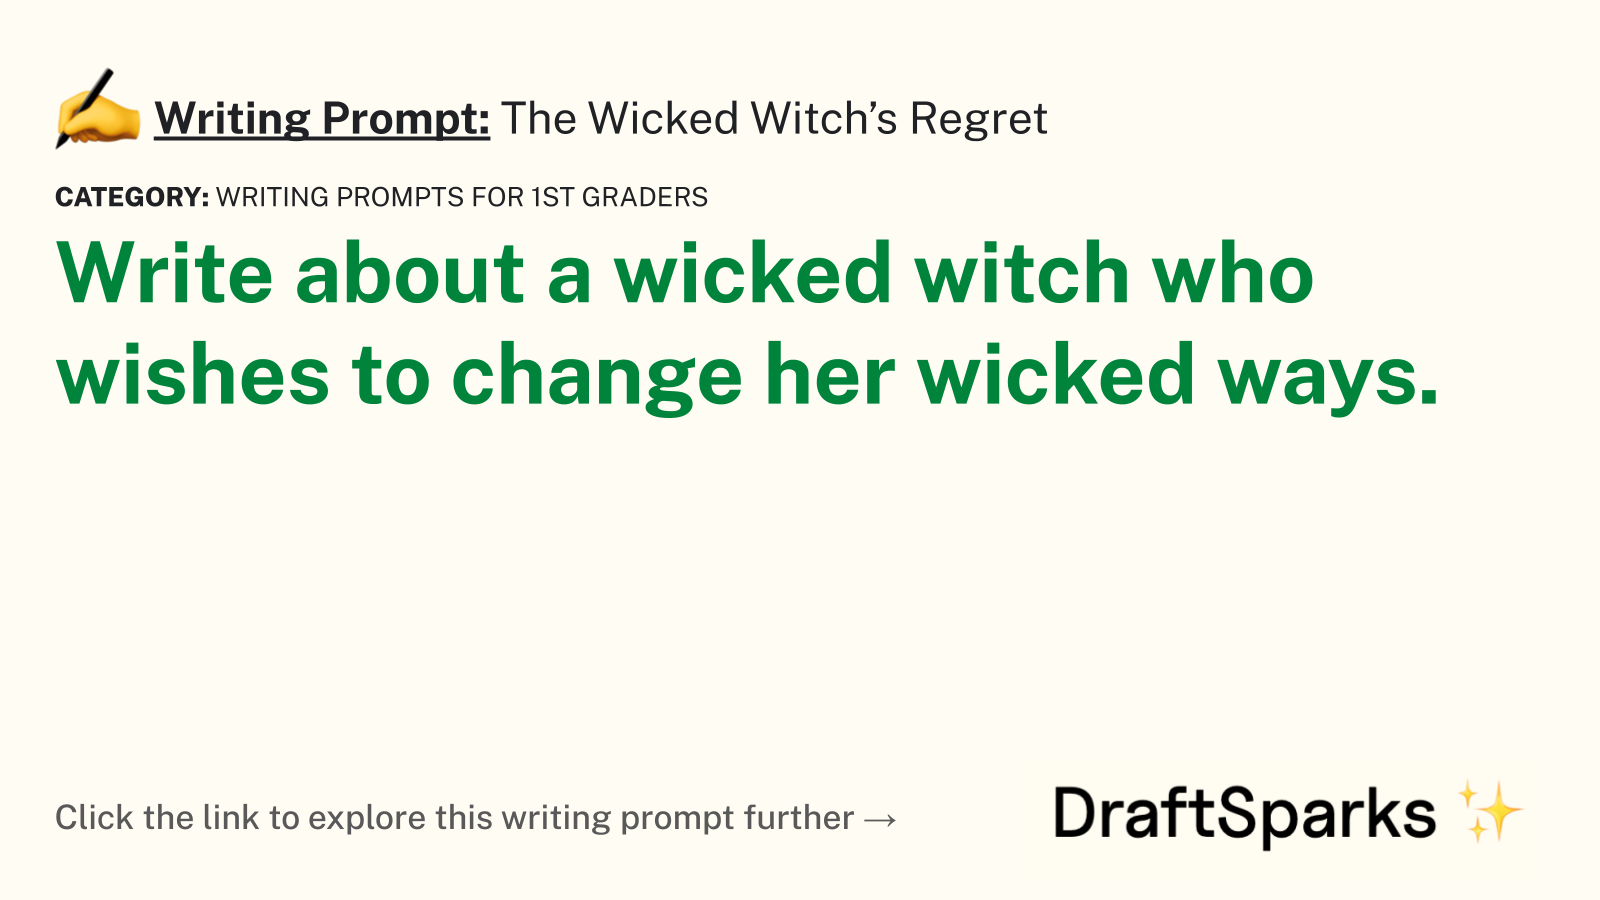 The Wicked Witch’s Regret